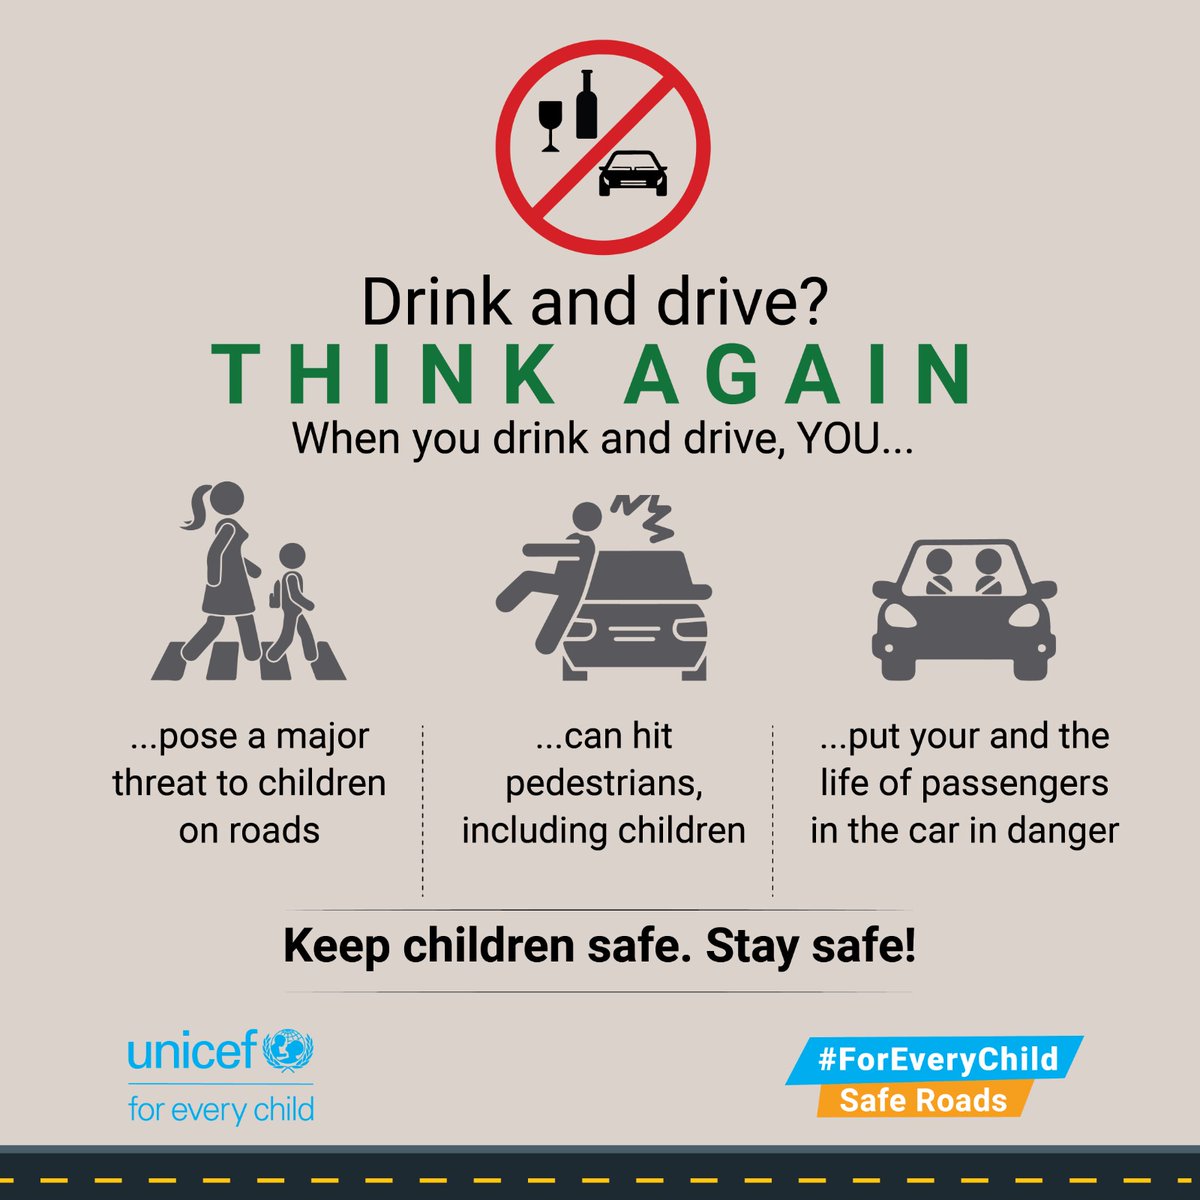 Safety must be at the core of efforts to reimagine how we move in the world.

#ForEveryChild, safe roads